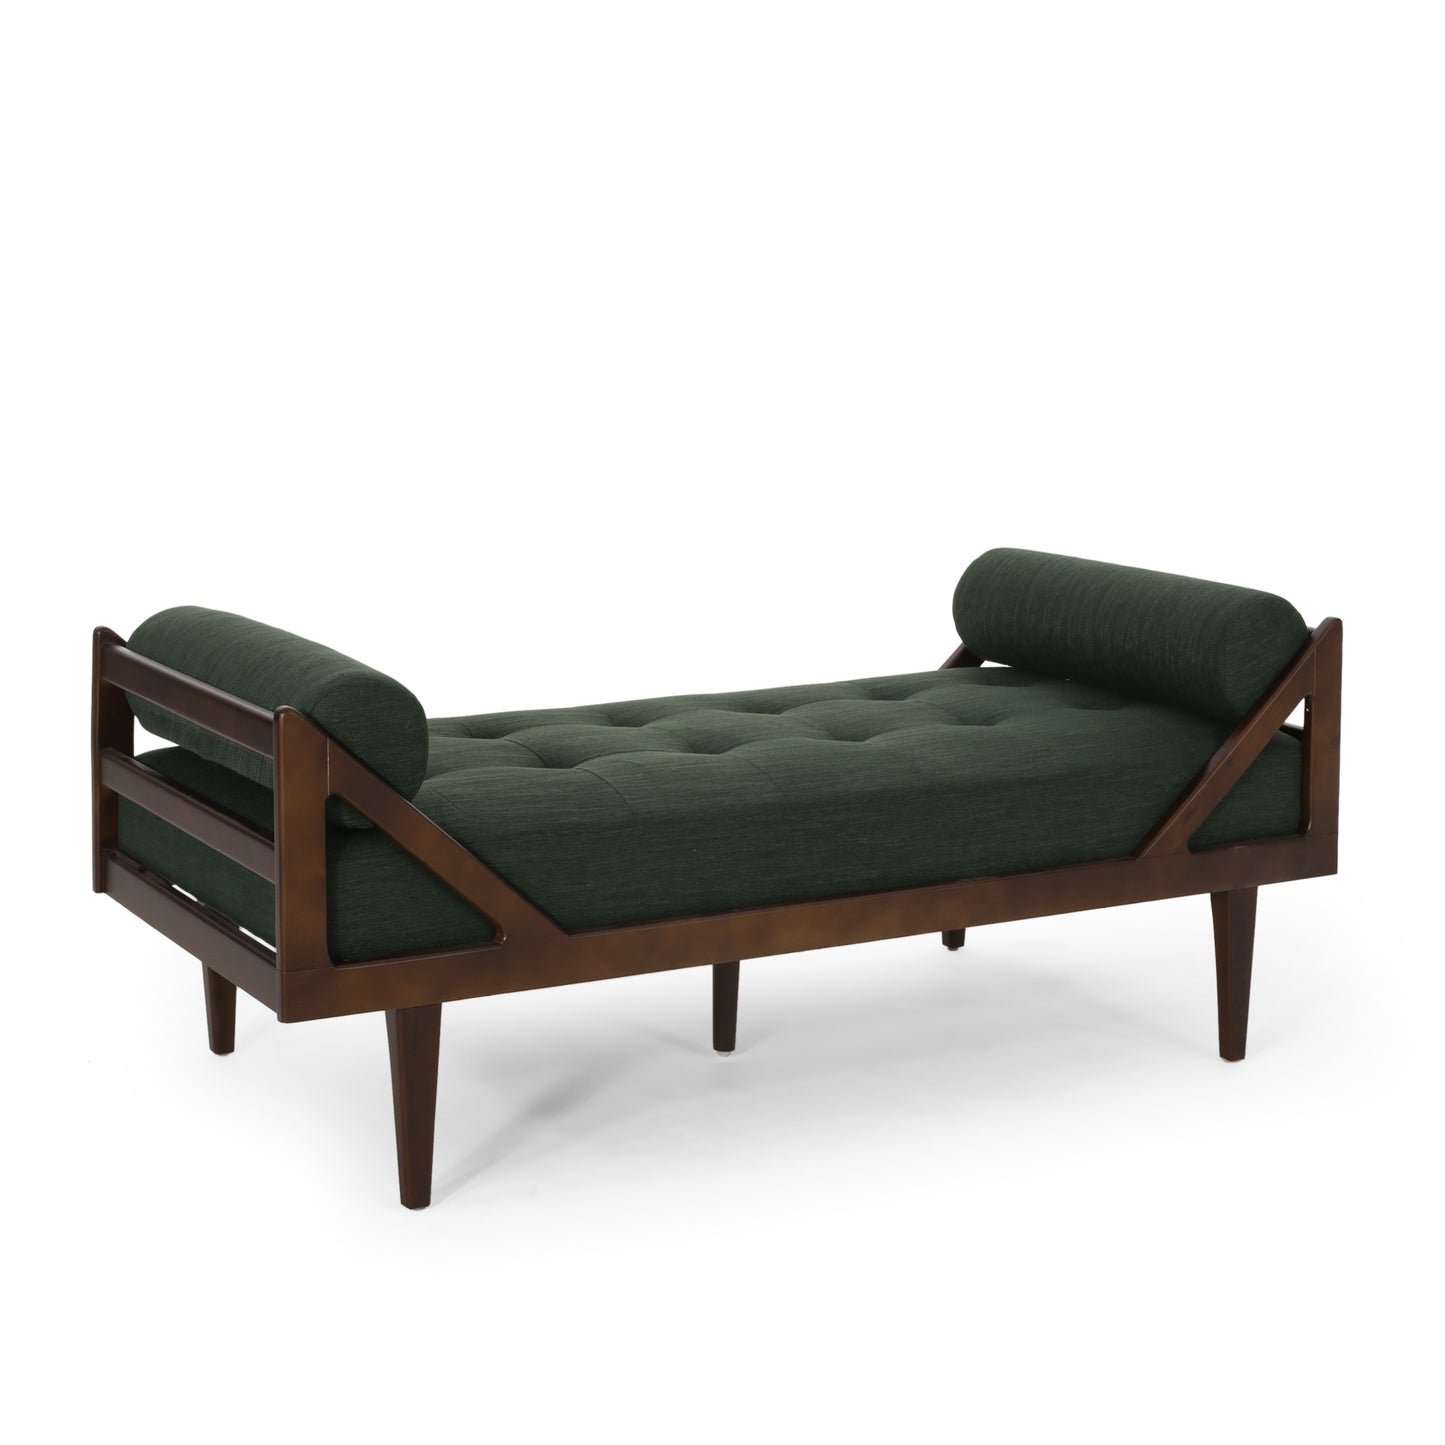 Sumner Contemporary Tufted Chaise Lounge with Rolled Accent Pillows